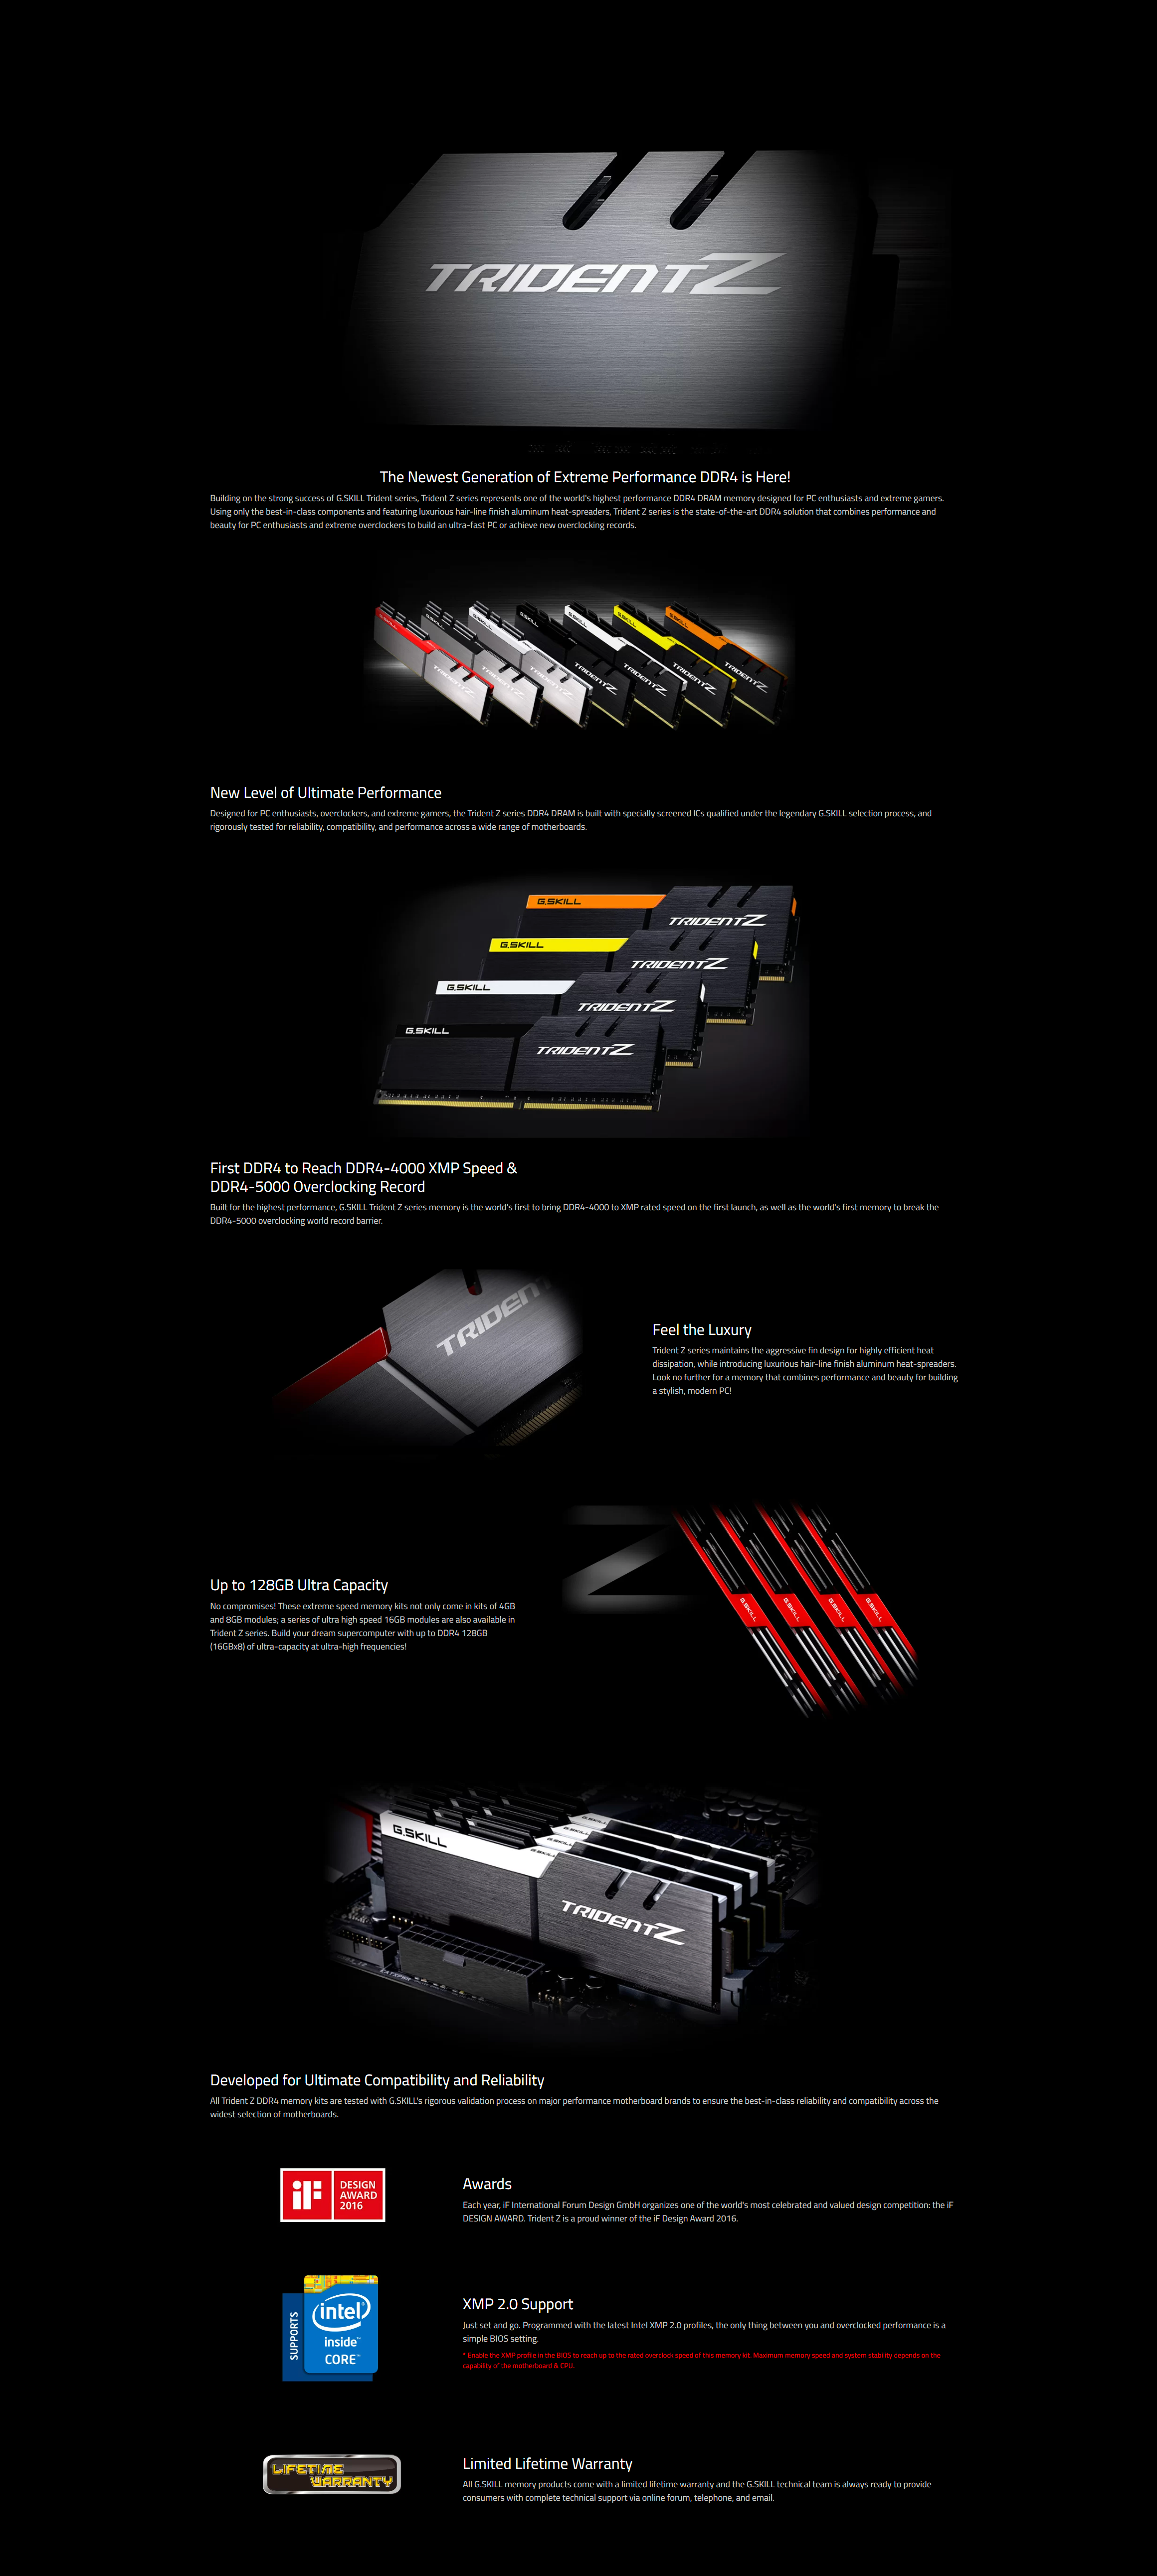 A large marketing image providing additional information about the product G.Skill 16GB Kit (2x8GB) DDR4 Trident Z C16 3200MHz - Black - Additional alt info not provided